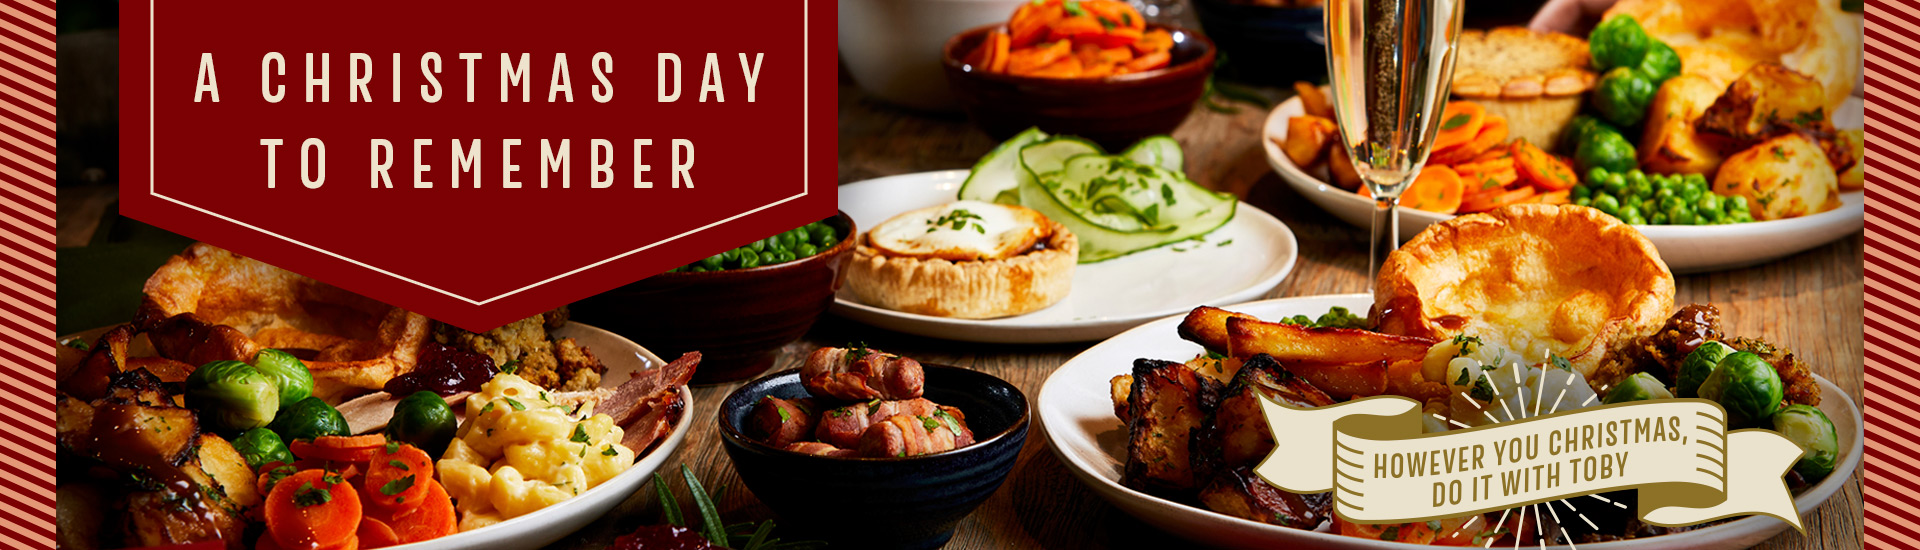 Christmas Day menu at Toby Carvery Stoneycroft